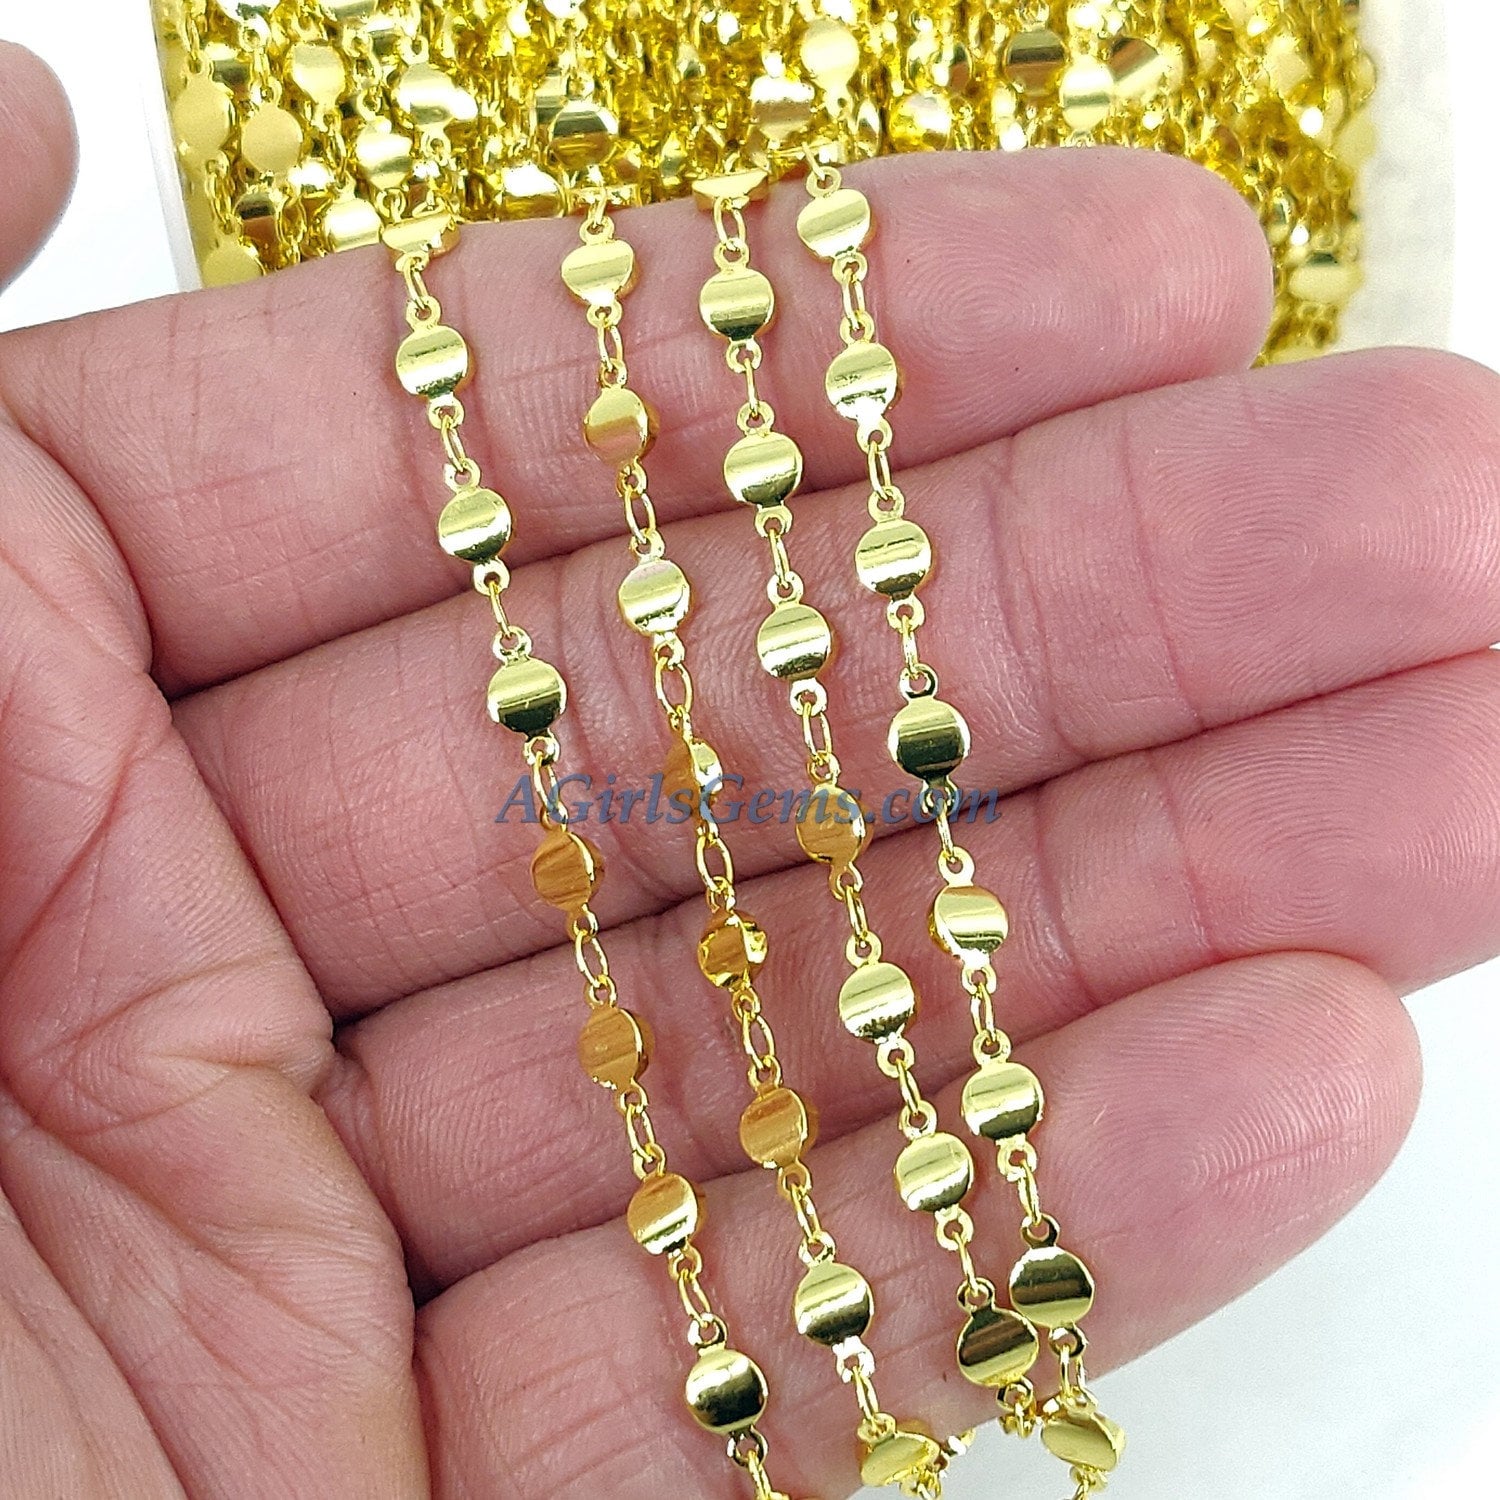 Gold Beaded Rosary Chain, Religious Chain CH #227, 4 mm Flat Oval Metal Chain